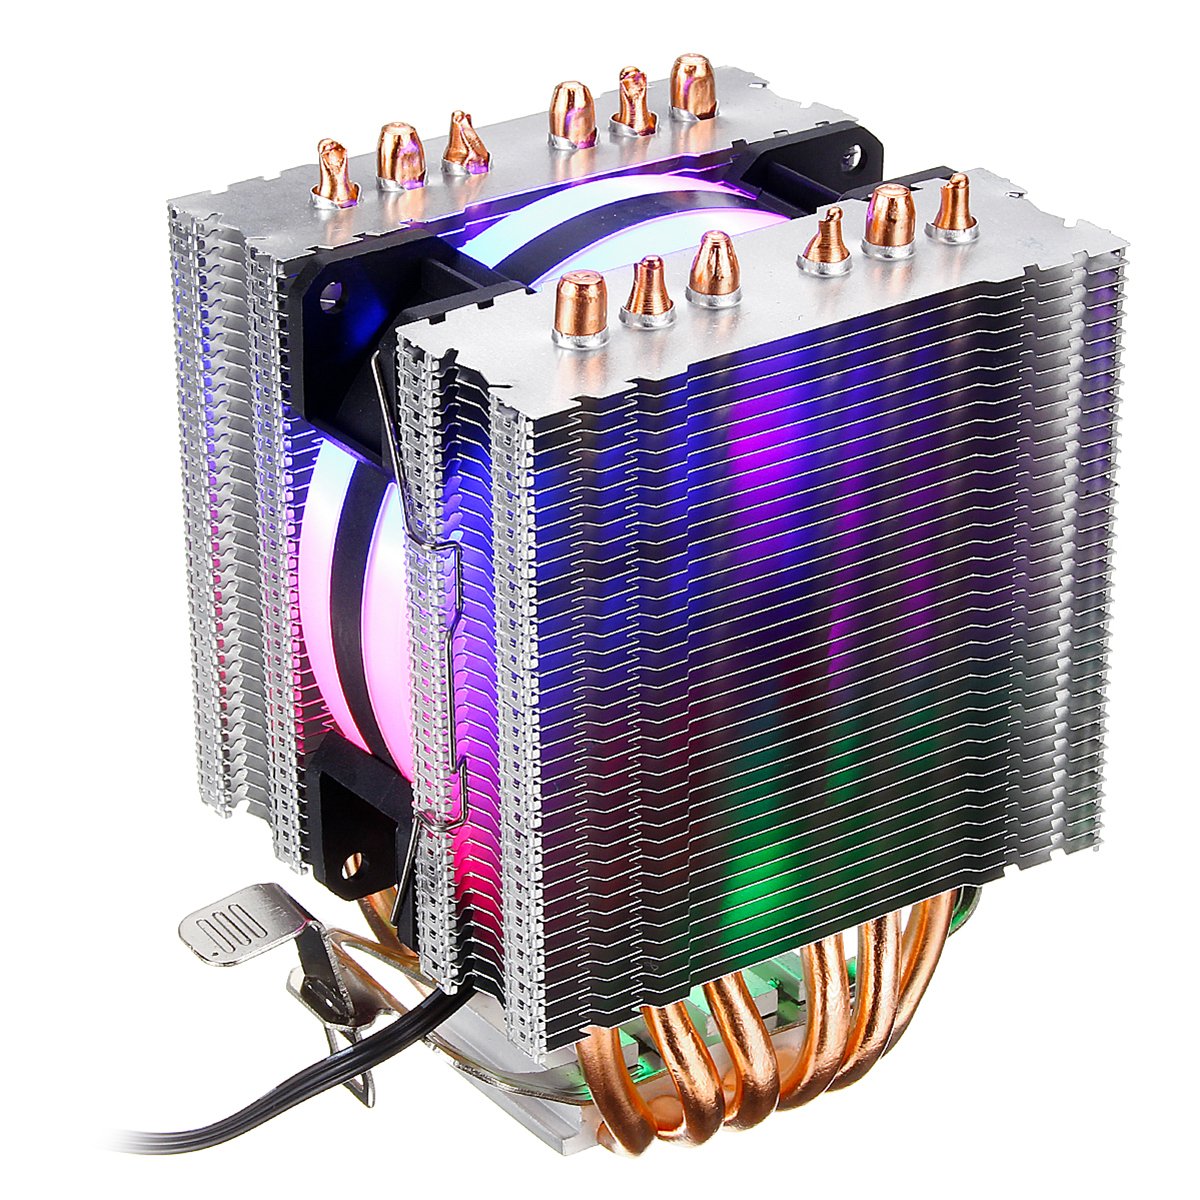 3 Pin CPU Cooler Cooling Fan Heatsink for Intel 775/1150/1151/1155/1156/1366 and AMD All Platforms 5 Colors Lighting 1